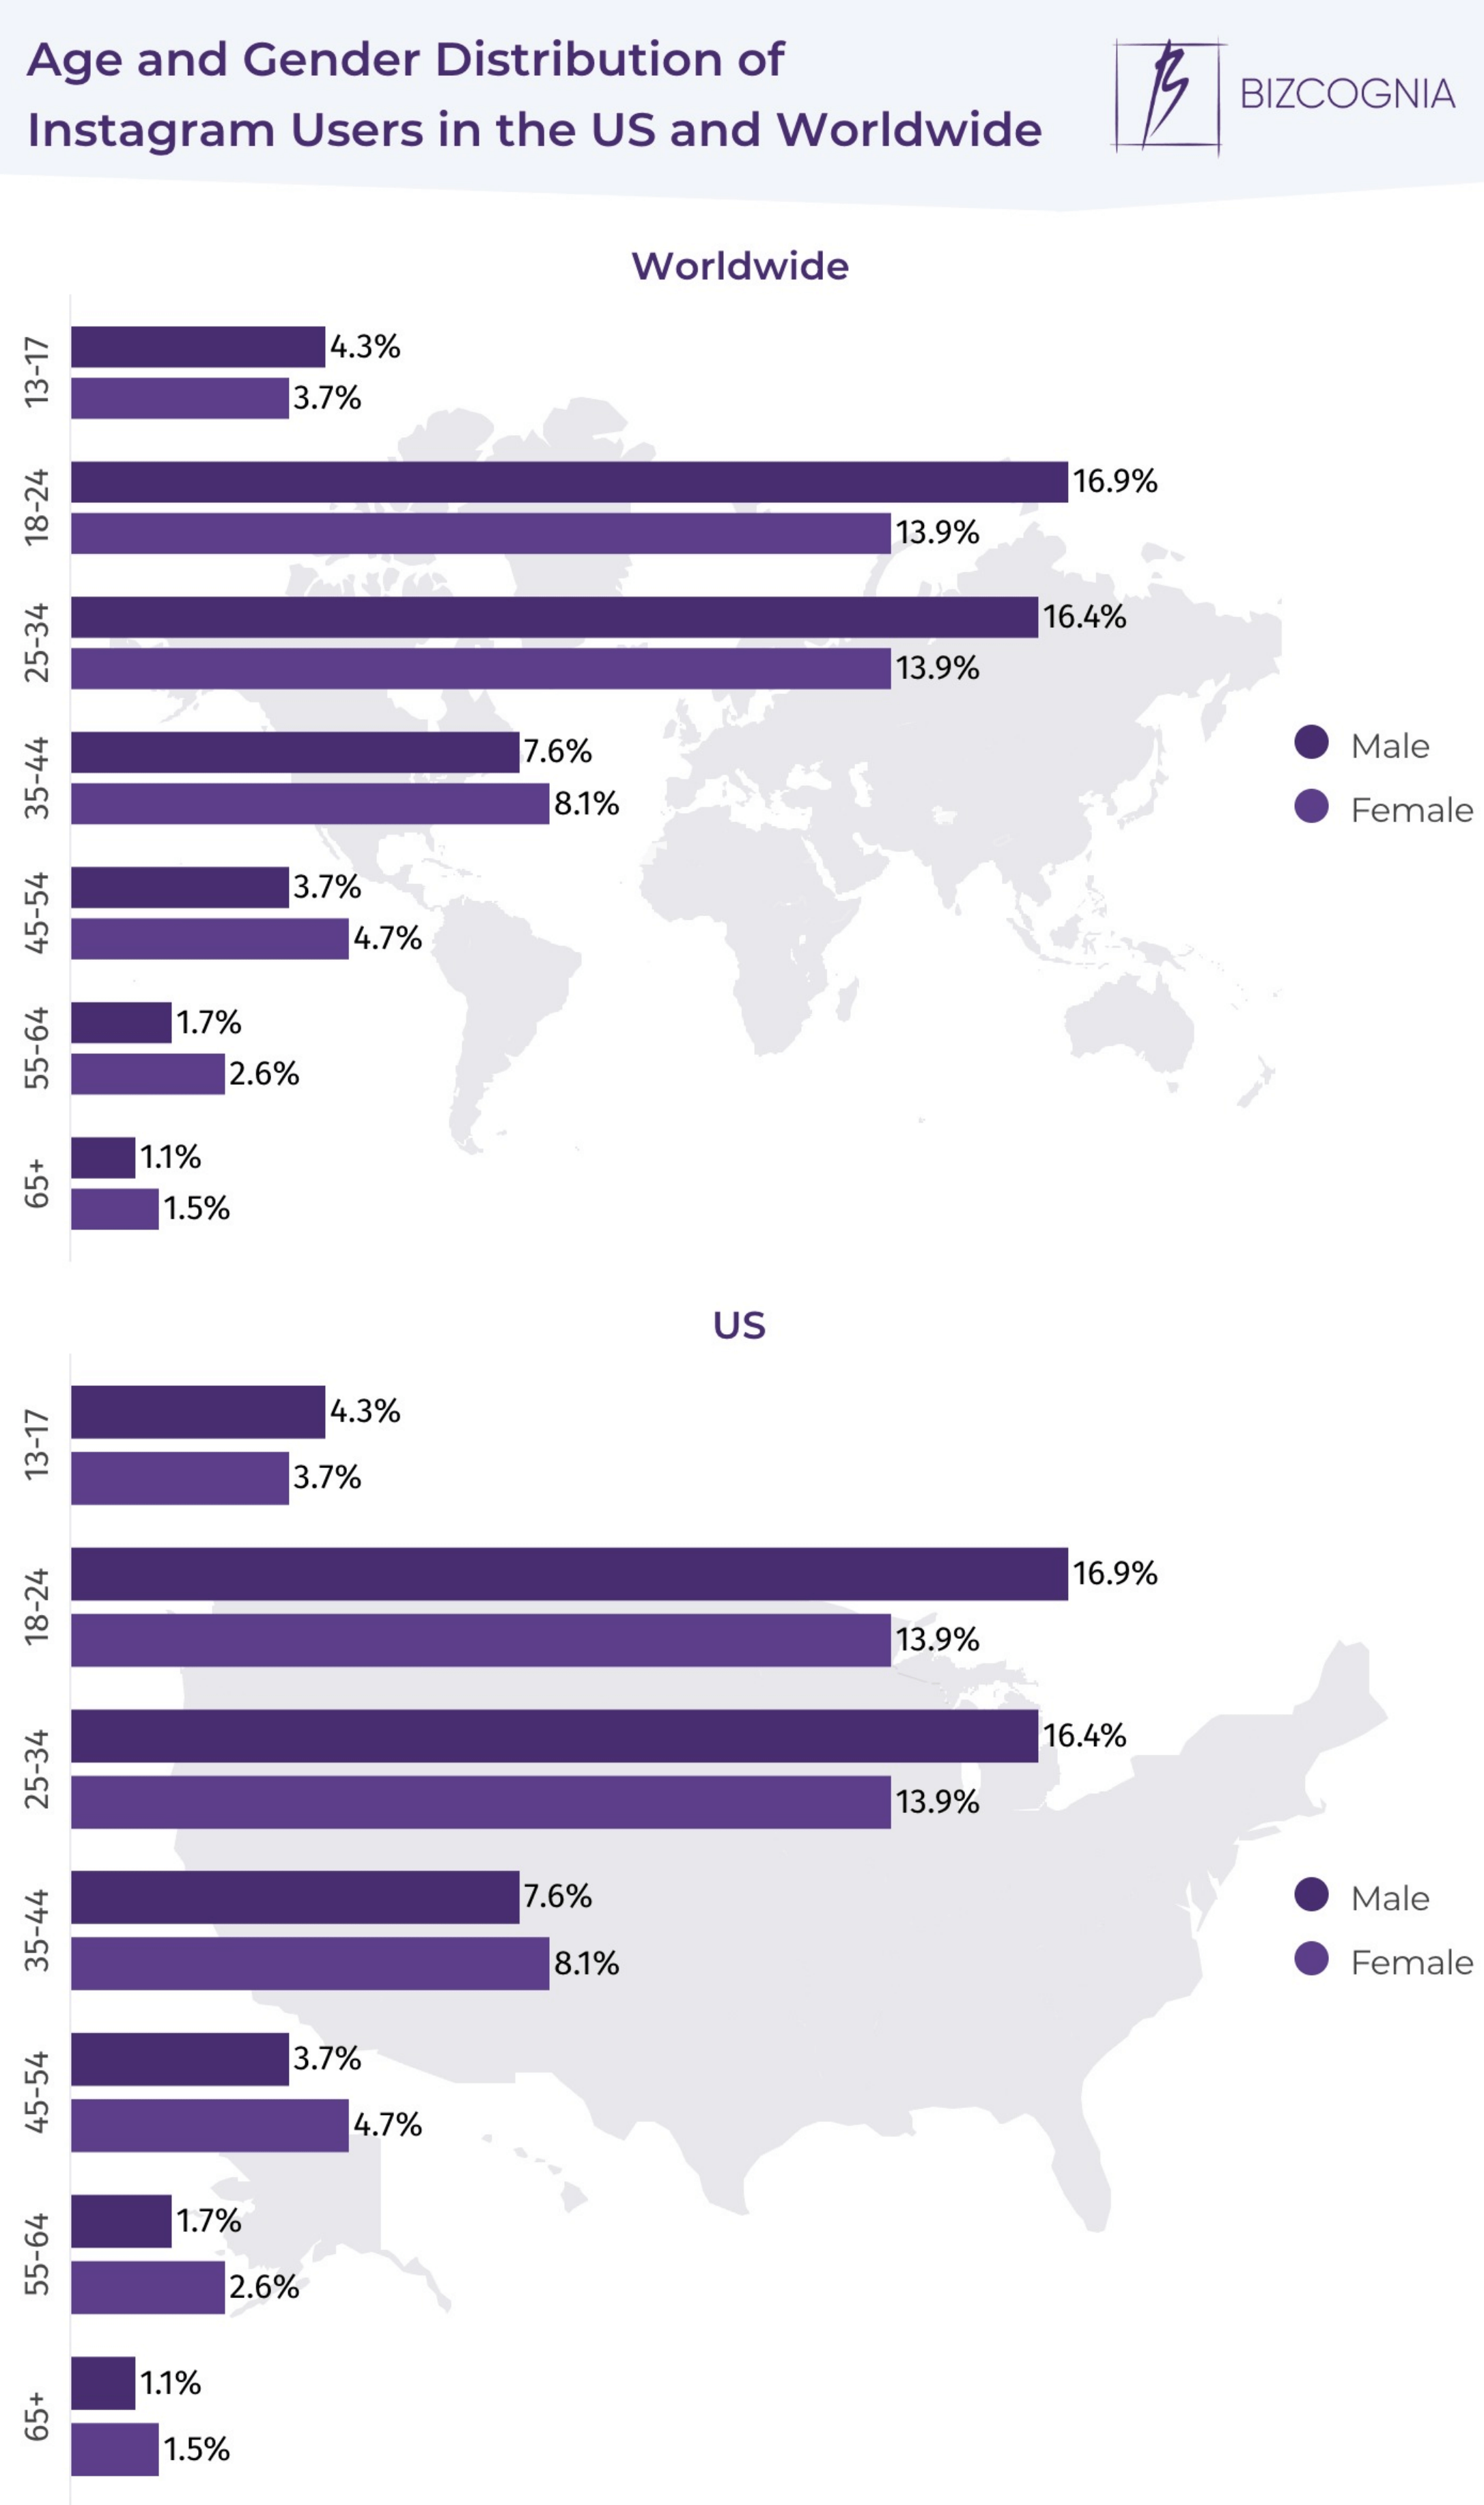 Global and US Instagram age and gender demographics